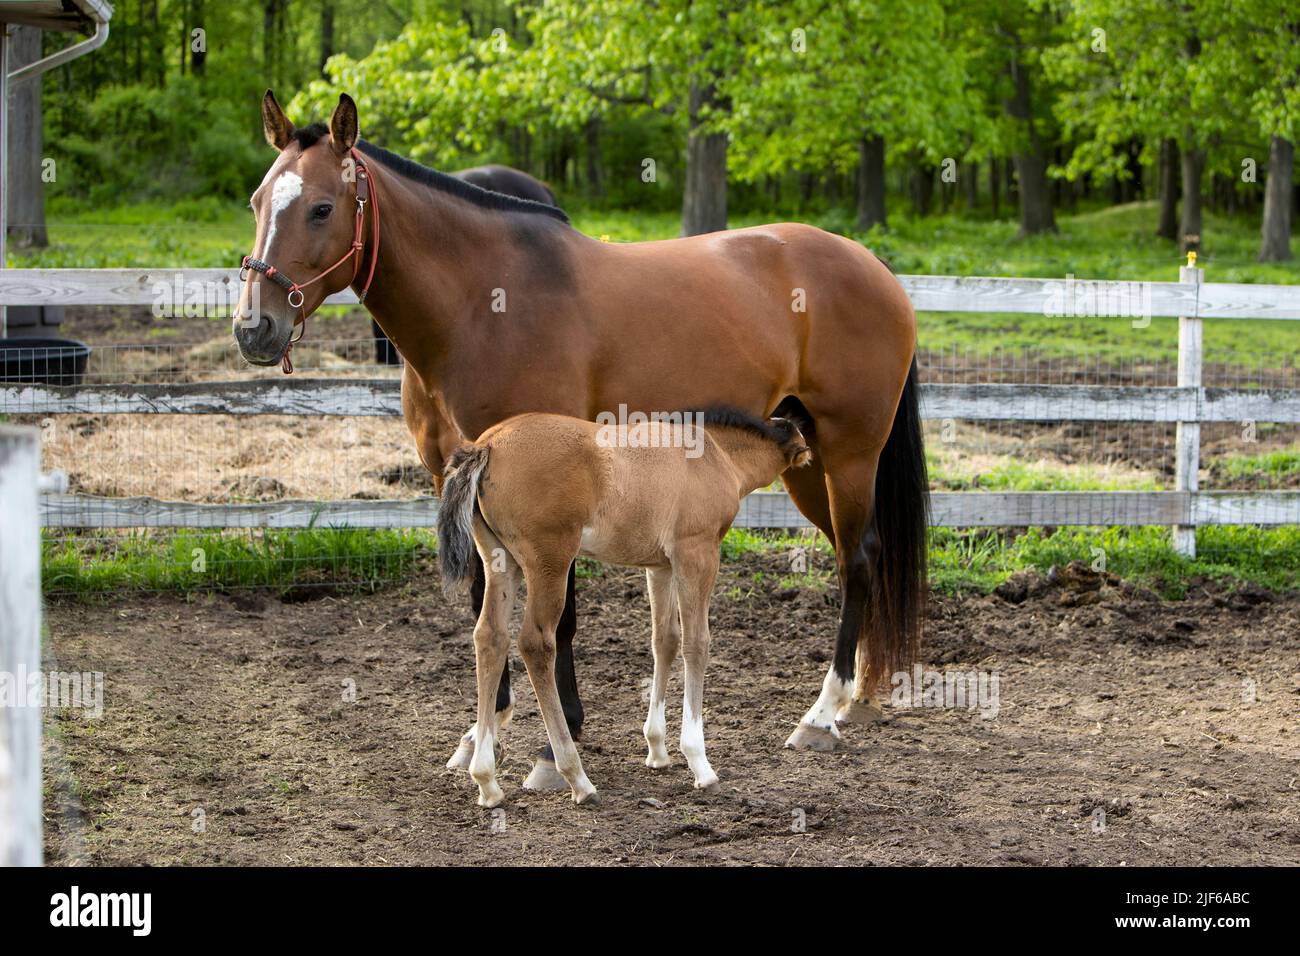 A foal nursing with her mother horse in a paddock. Stock Photo